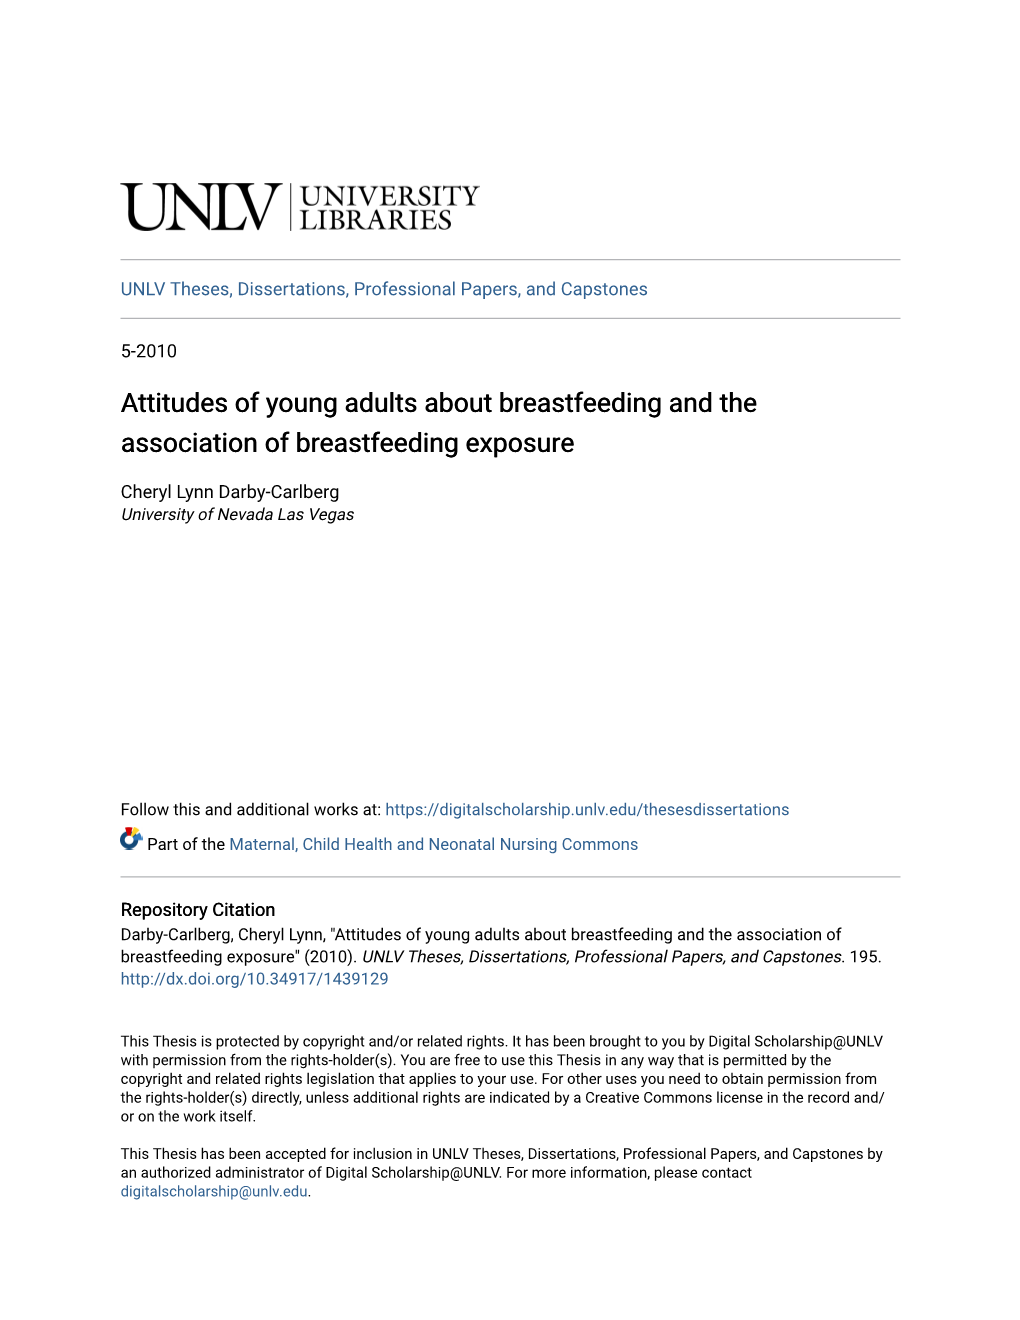 Attitudes of Young Adults About Breastfeeding and the Association of Breastfeeding Exposure